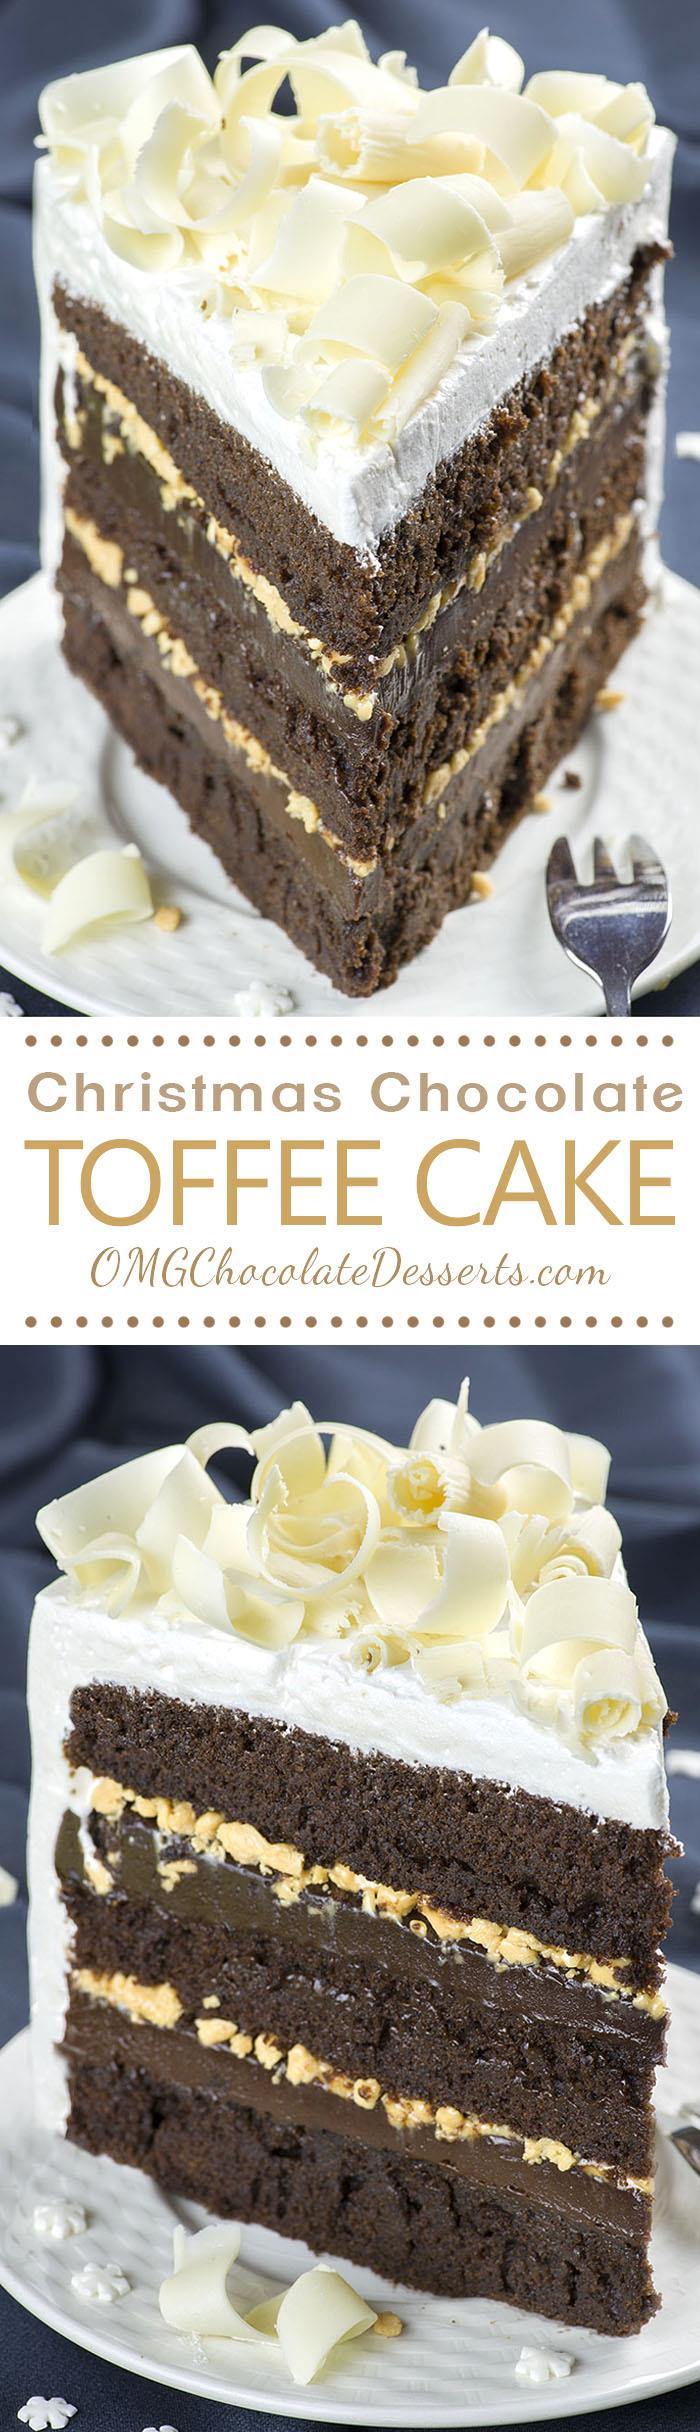 Needless to say, this Christmas Chocolate Toffee Cake is a chocolate lover’s dream and fancy enough to take a central place on your Christmas table!